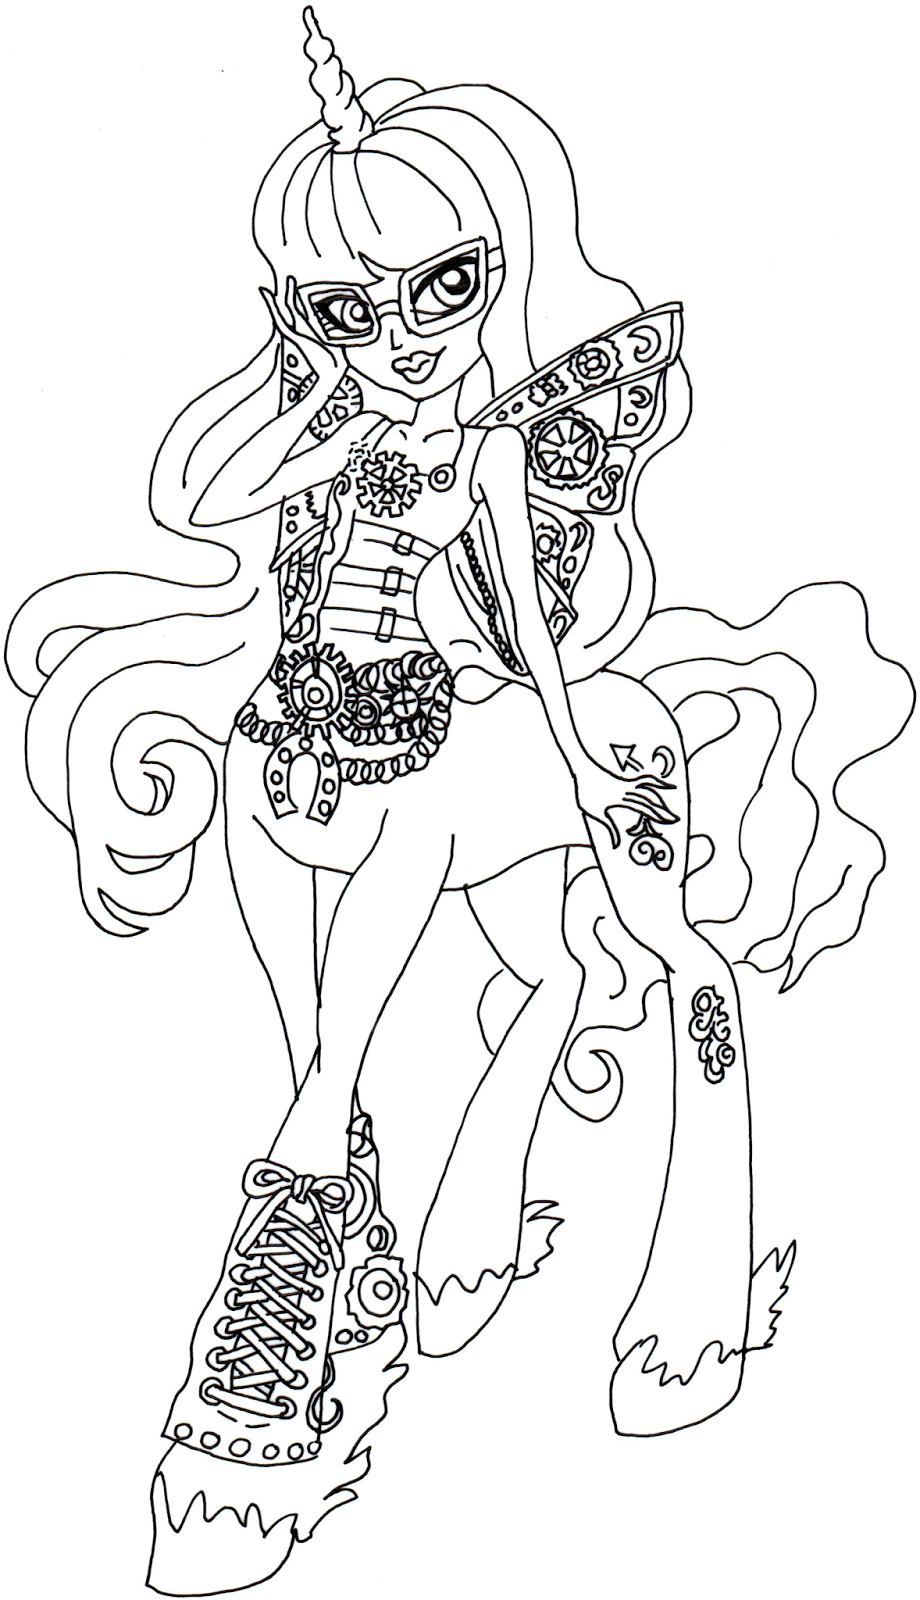 Download Free Printable Monster High Coloring Pages: November 2015